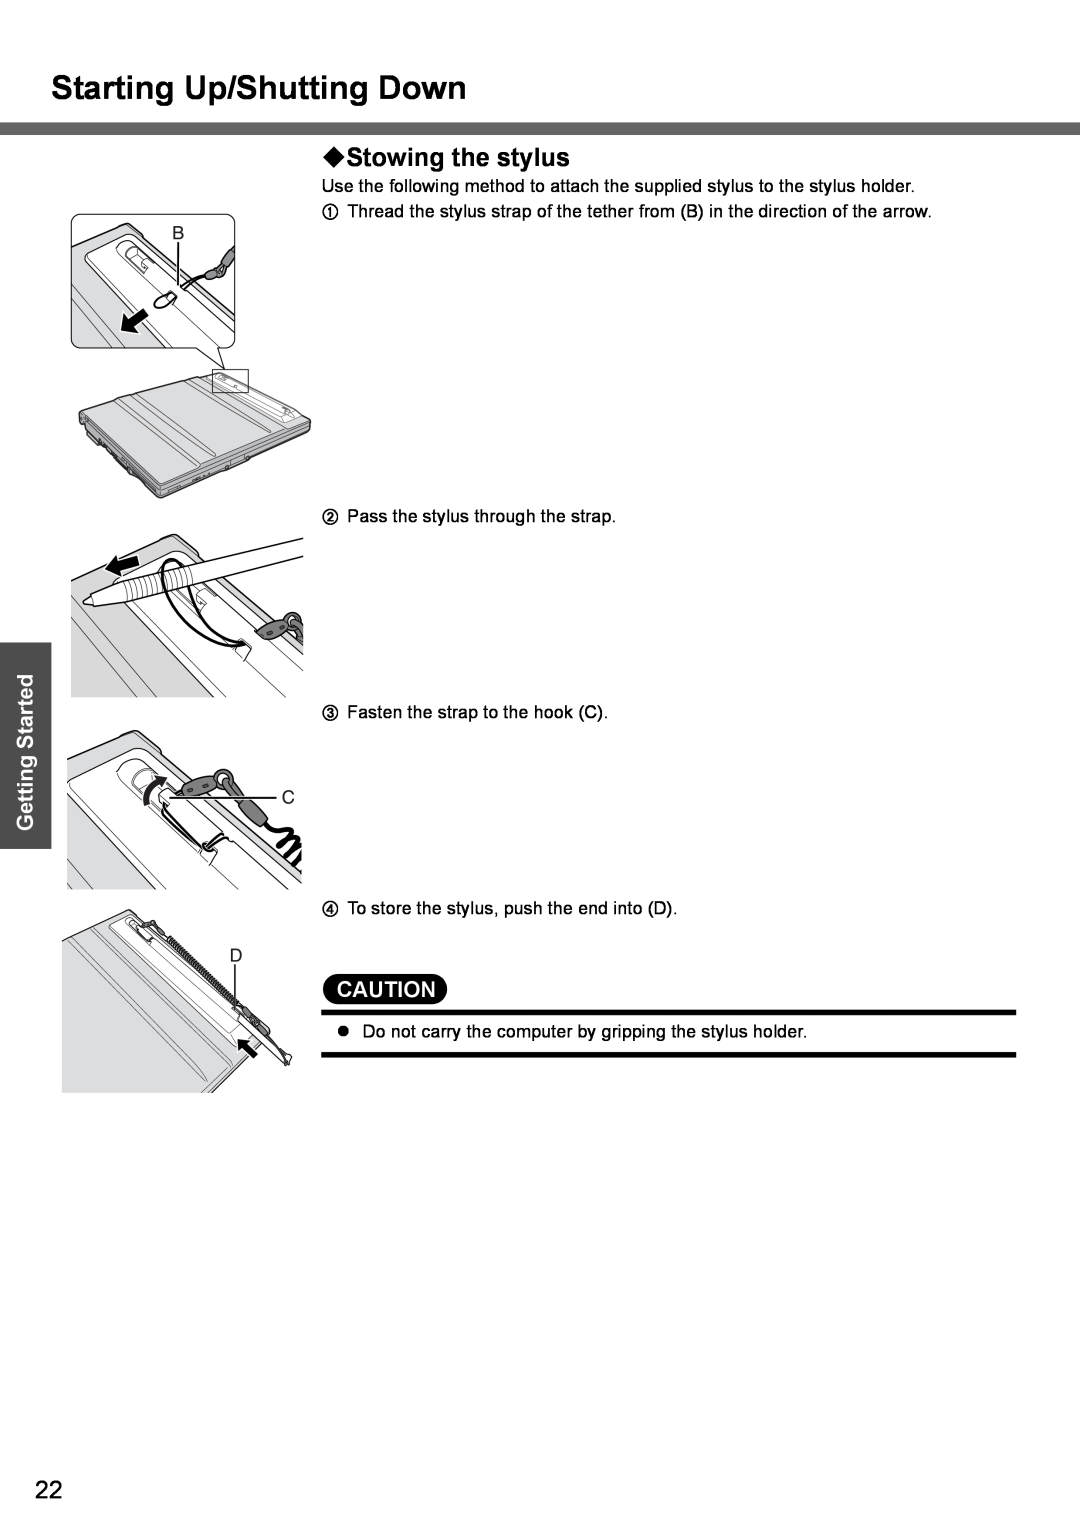 Panasonic CF-T4 operating instructions ‹Stowing the stylus, Starting Up/Shutting Down, Getting Started 